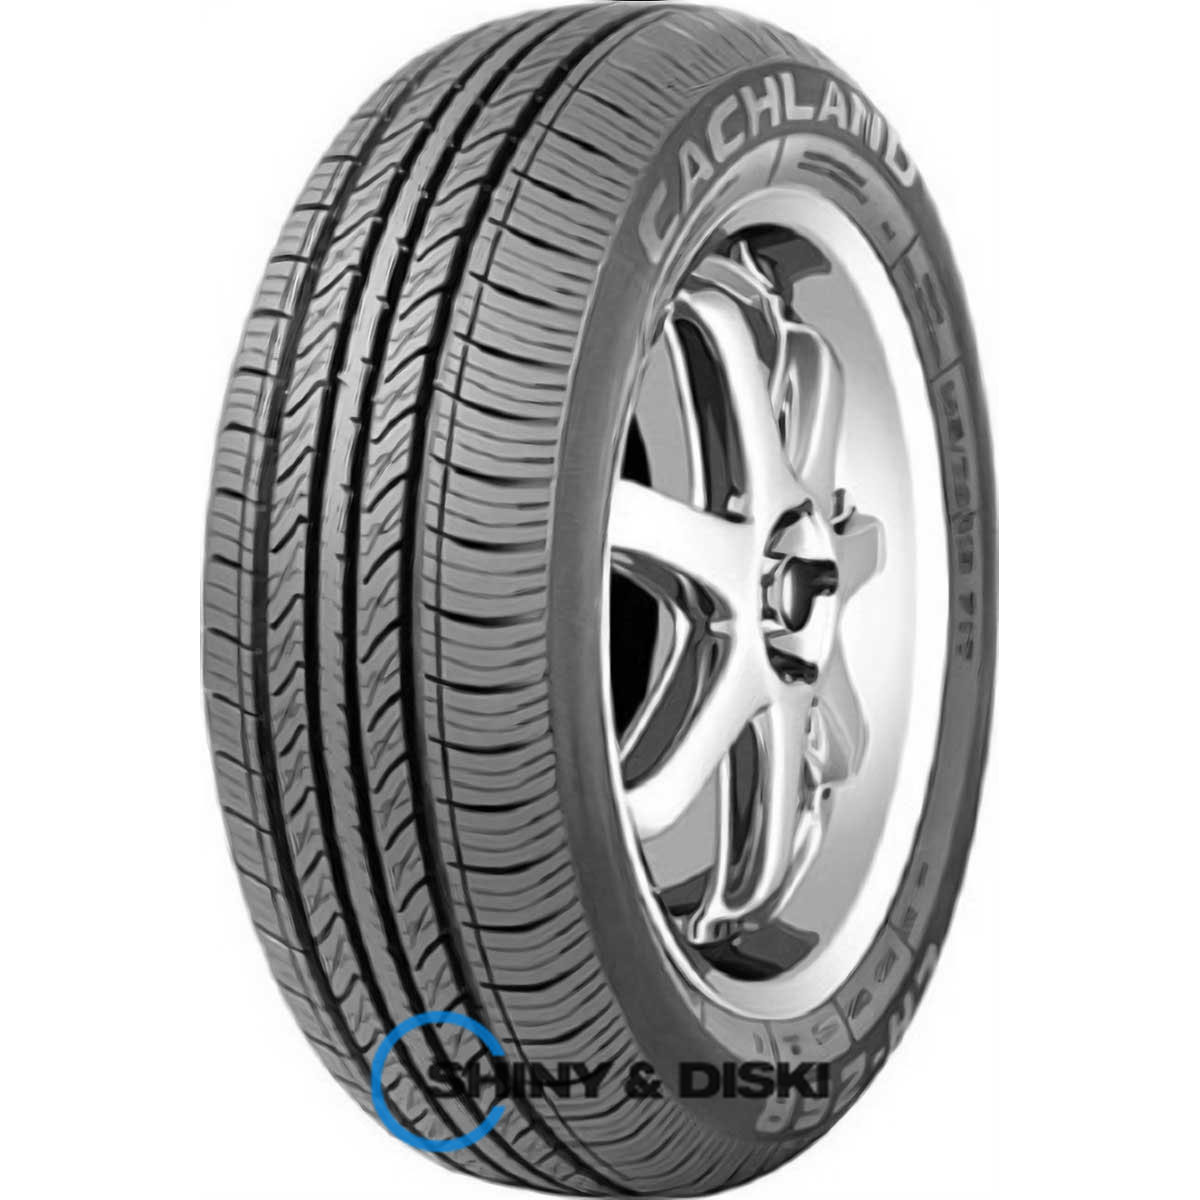 cachland ch-268 155/65 r14 75t